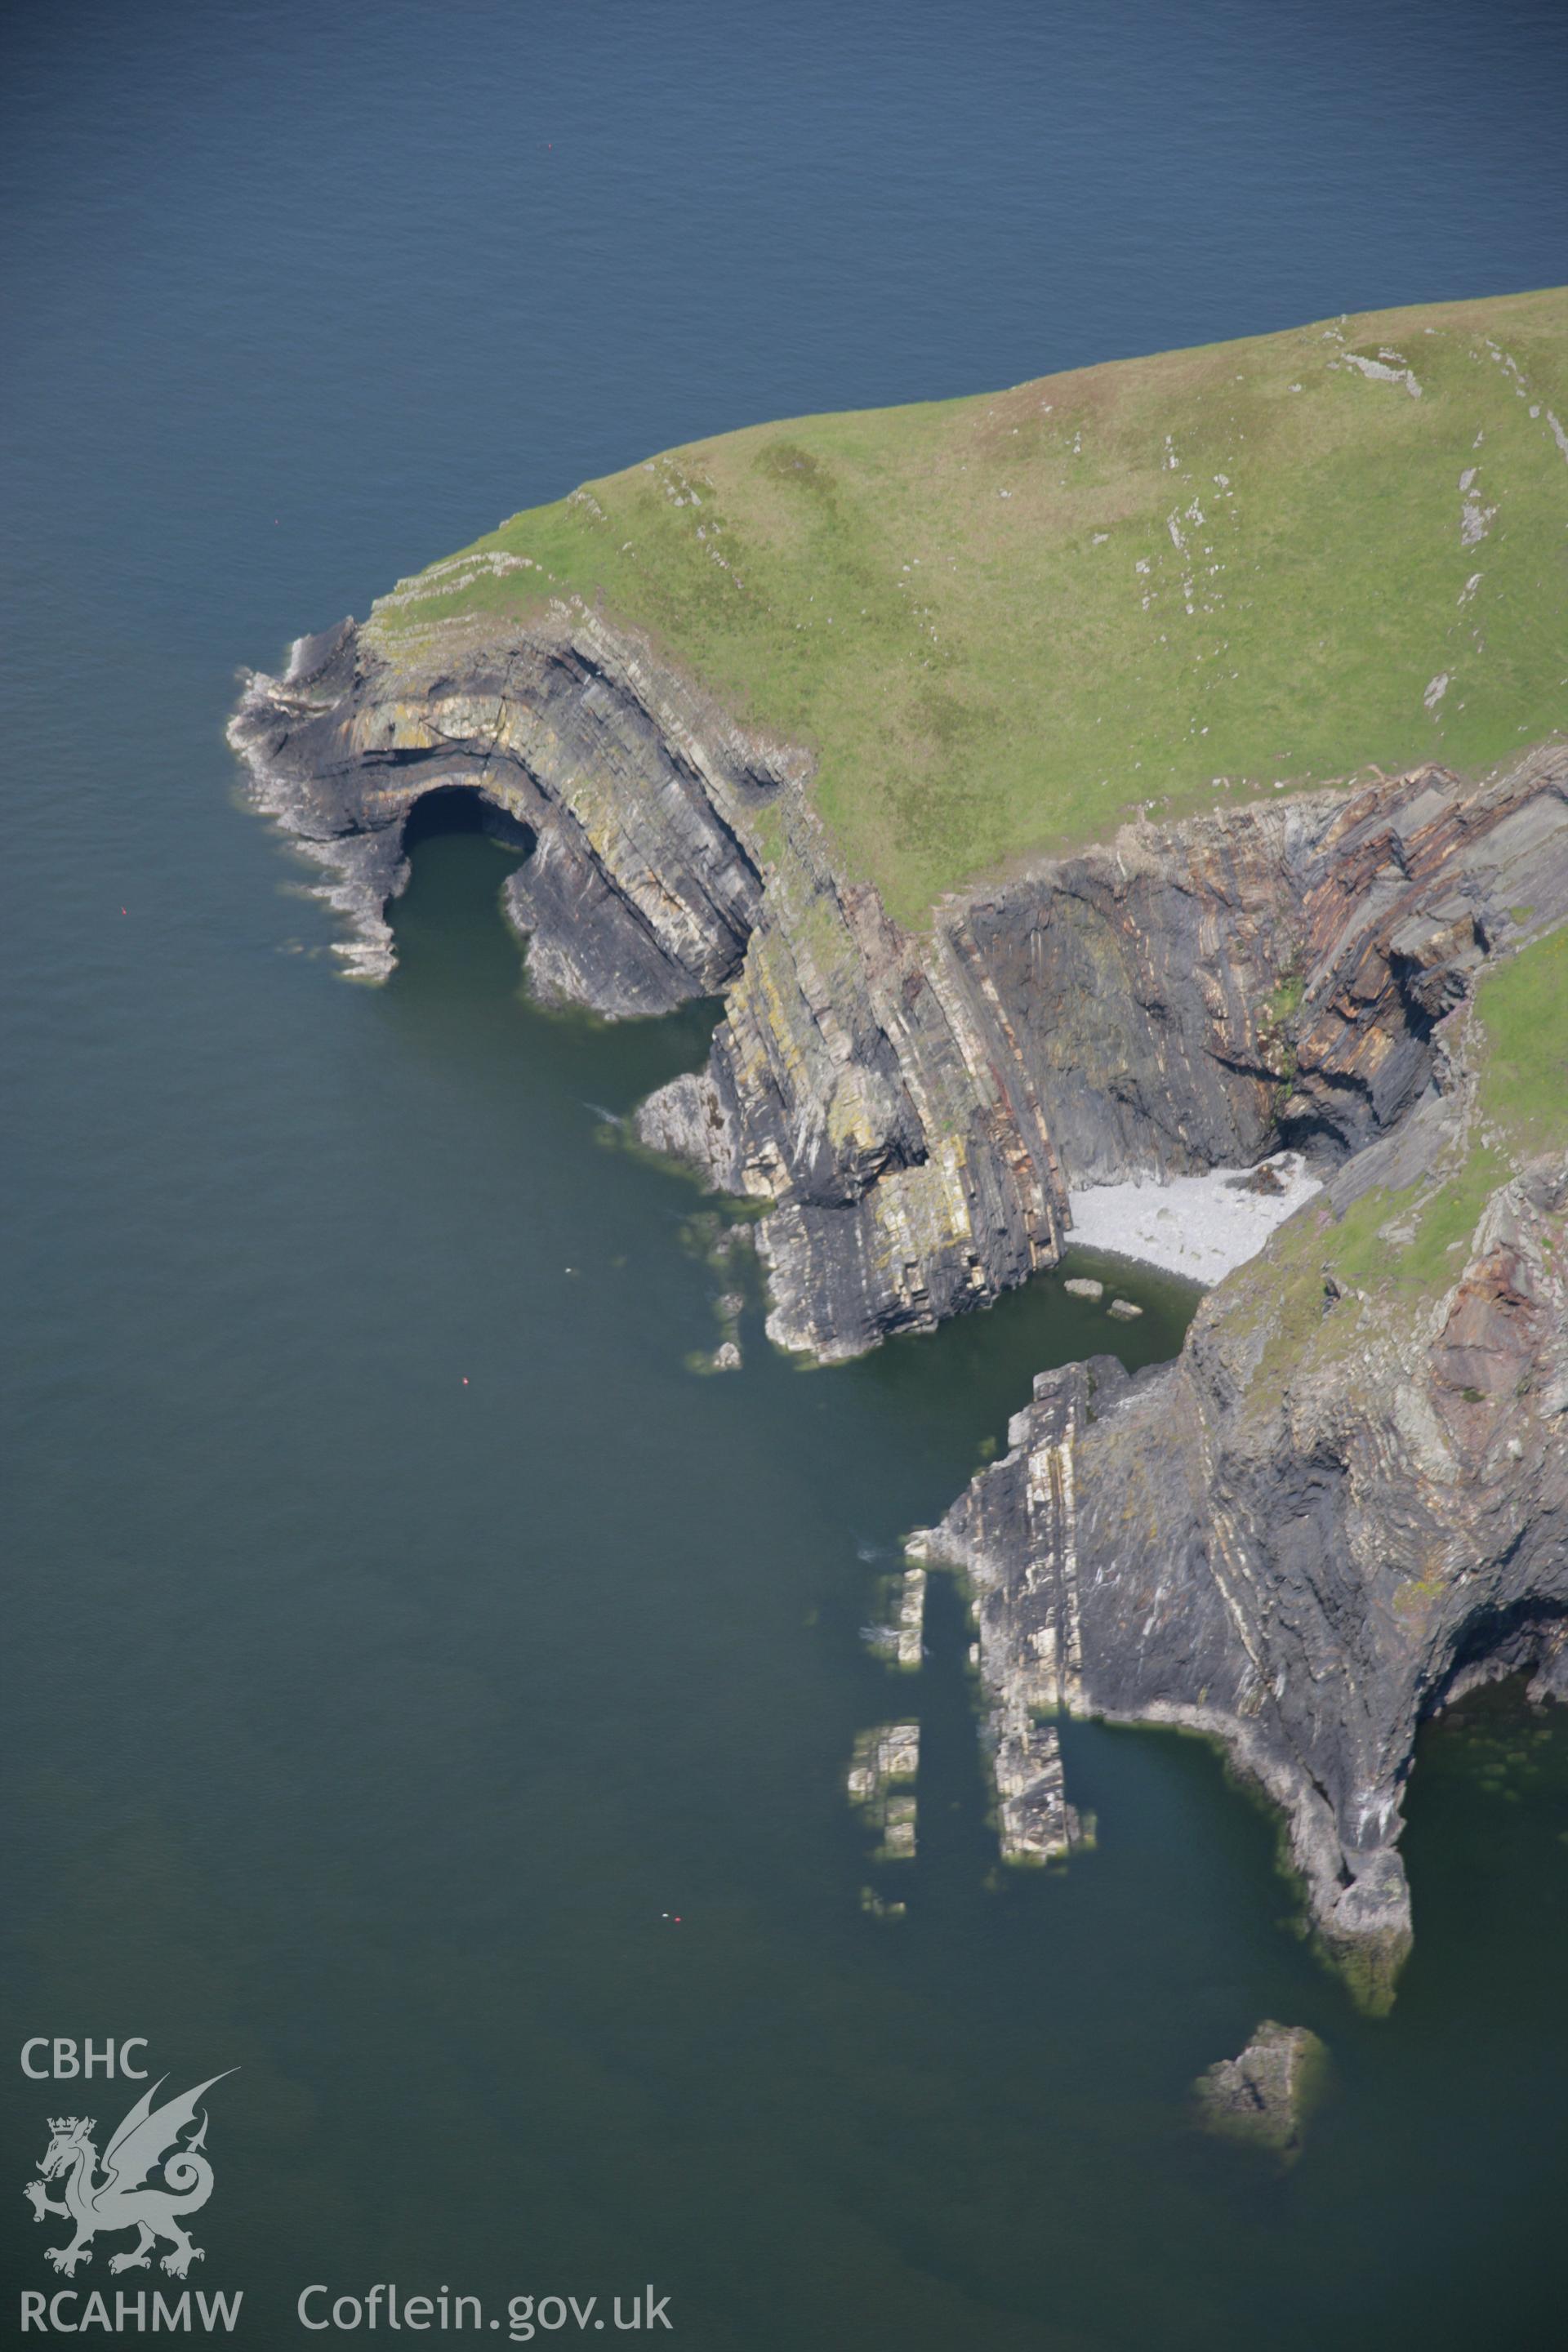 RCAHMW colour oblique aerial photograph of the Pembrokeshire Coast Path between Ceibwr Bay and Foel Hendre, from the south-west and showing the geology of the area. Taken on 08 June 2006 by Toby Driver.